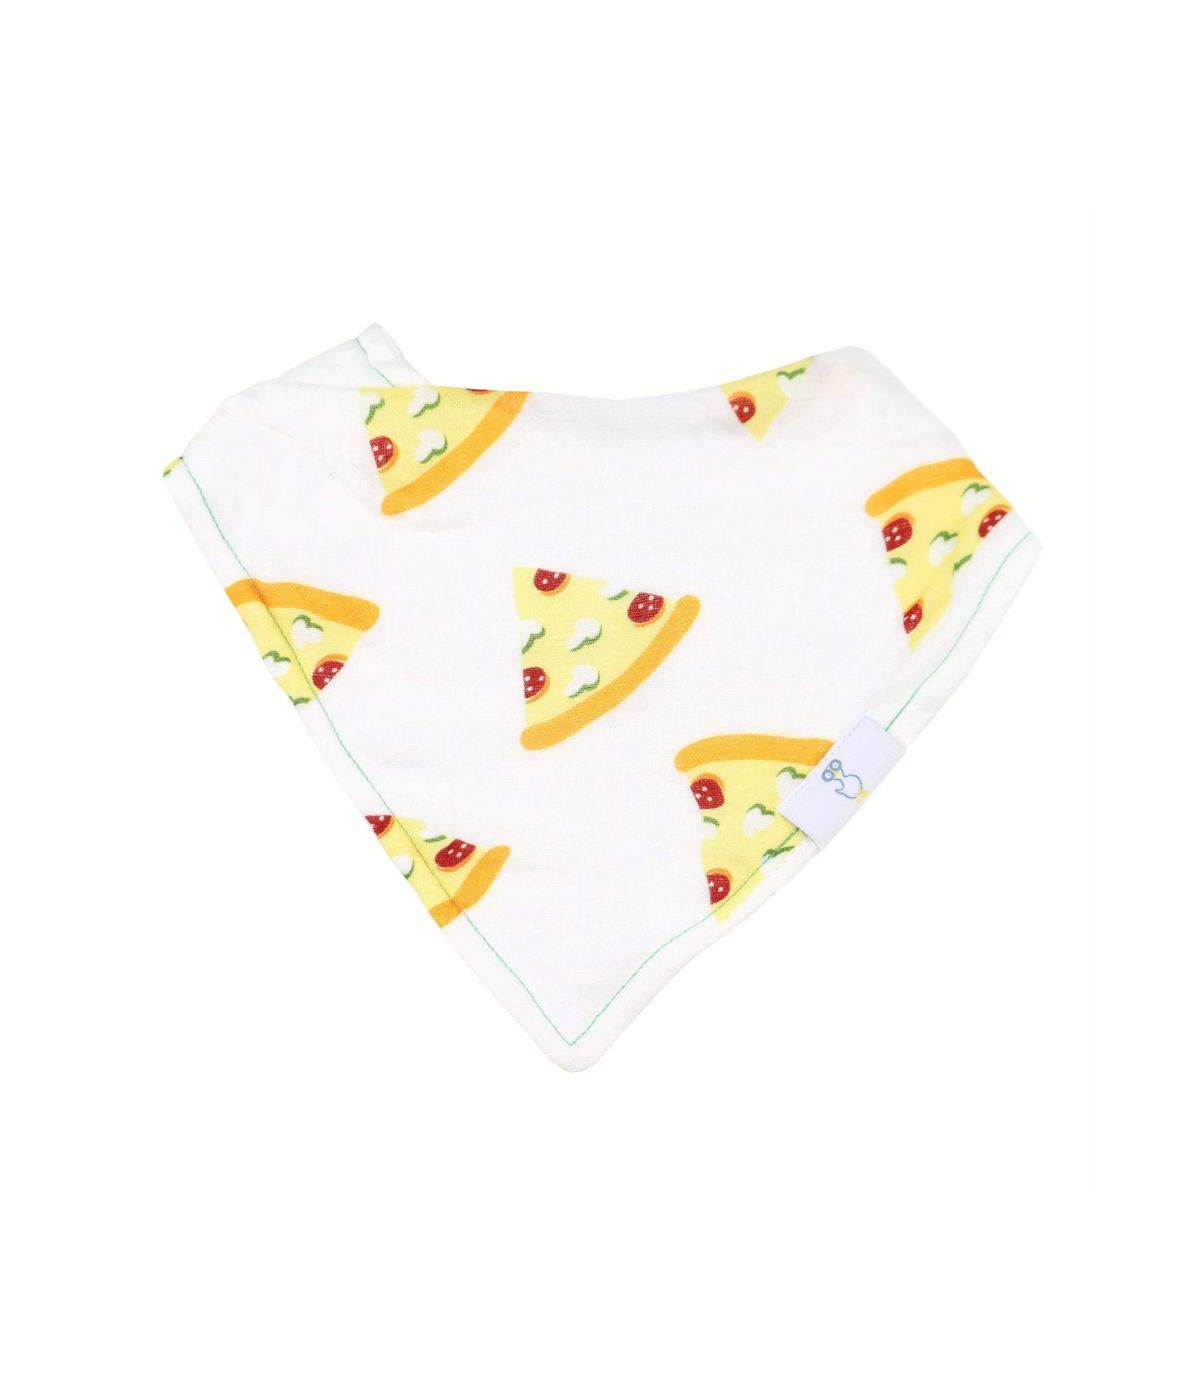 Slice Slice Baby and Pizza 2 Pack Muslin & Terry Cloth Bib Set White/Yellow/Red/Green